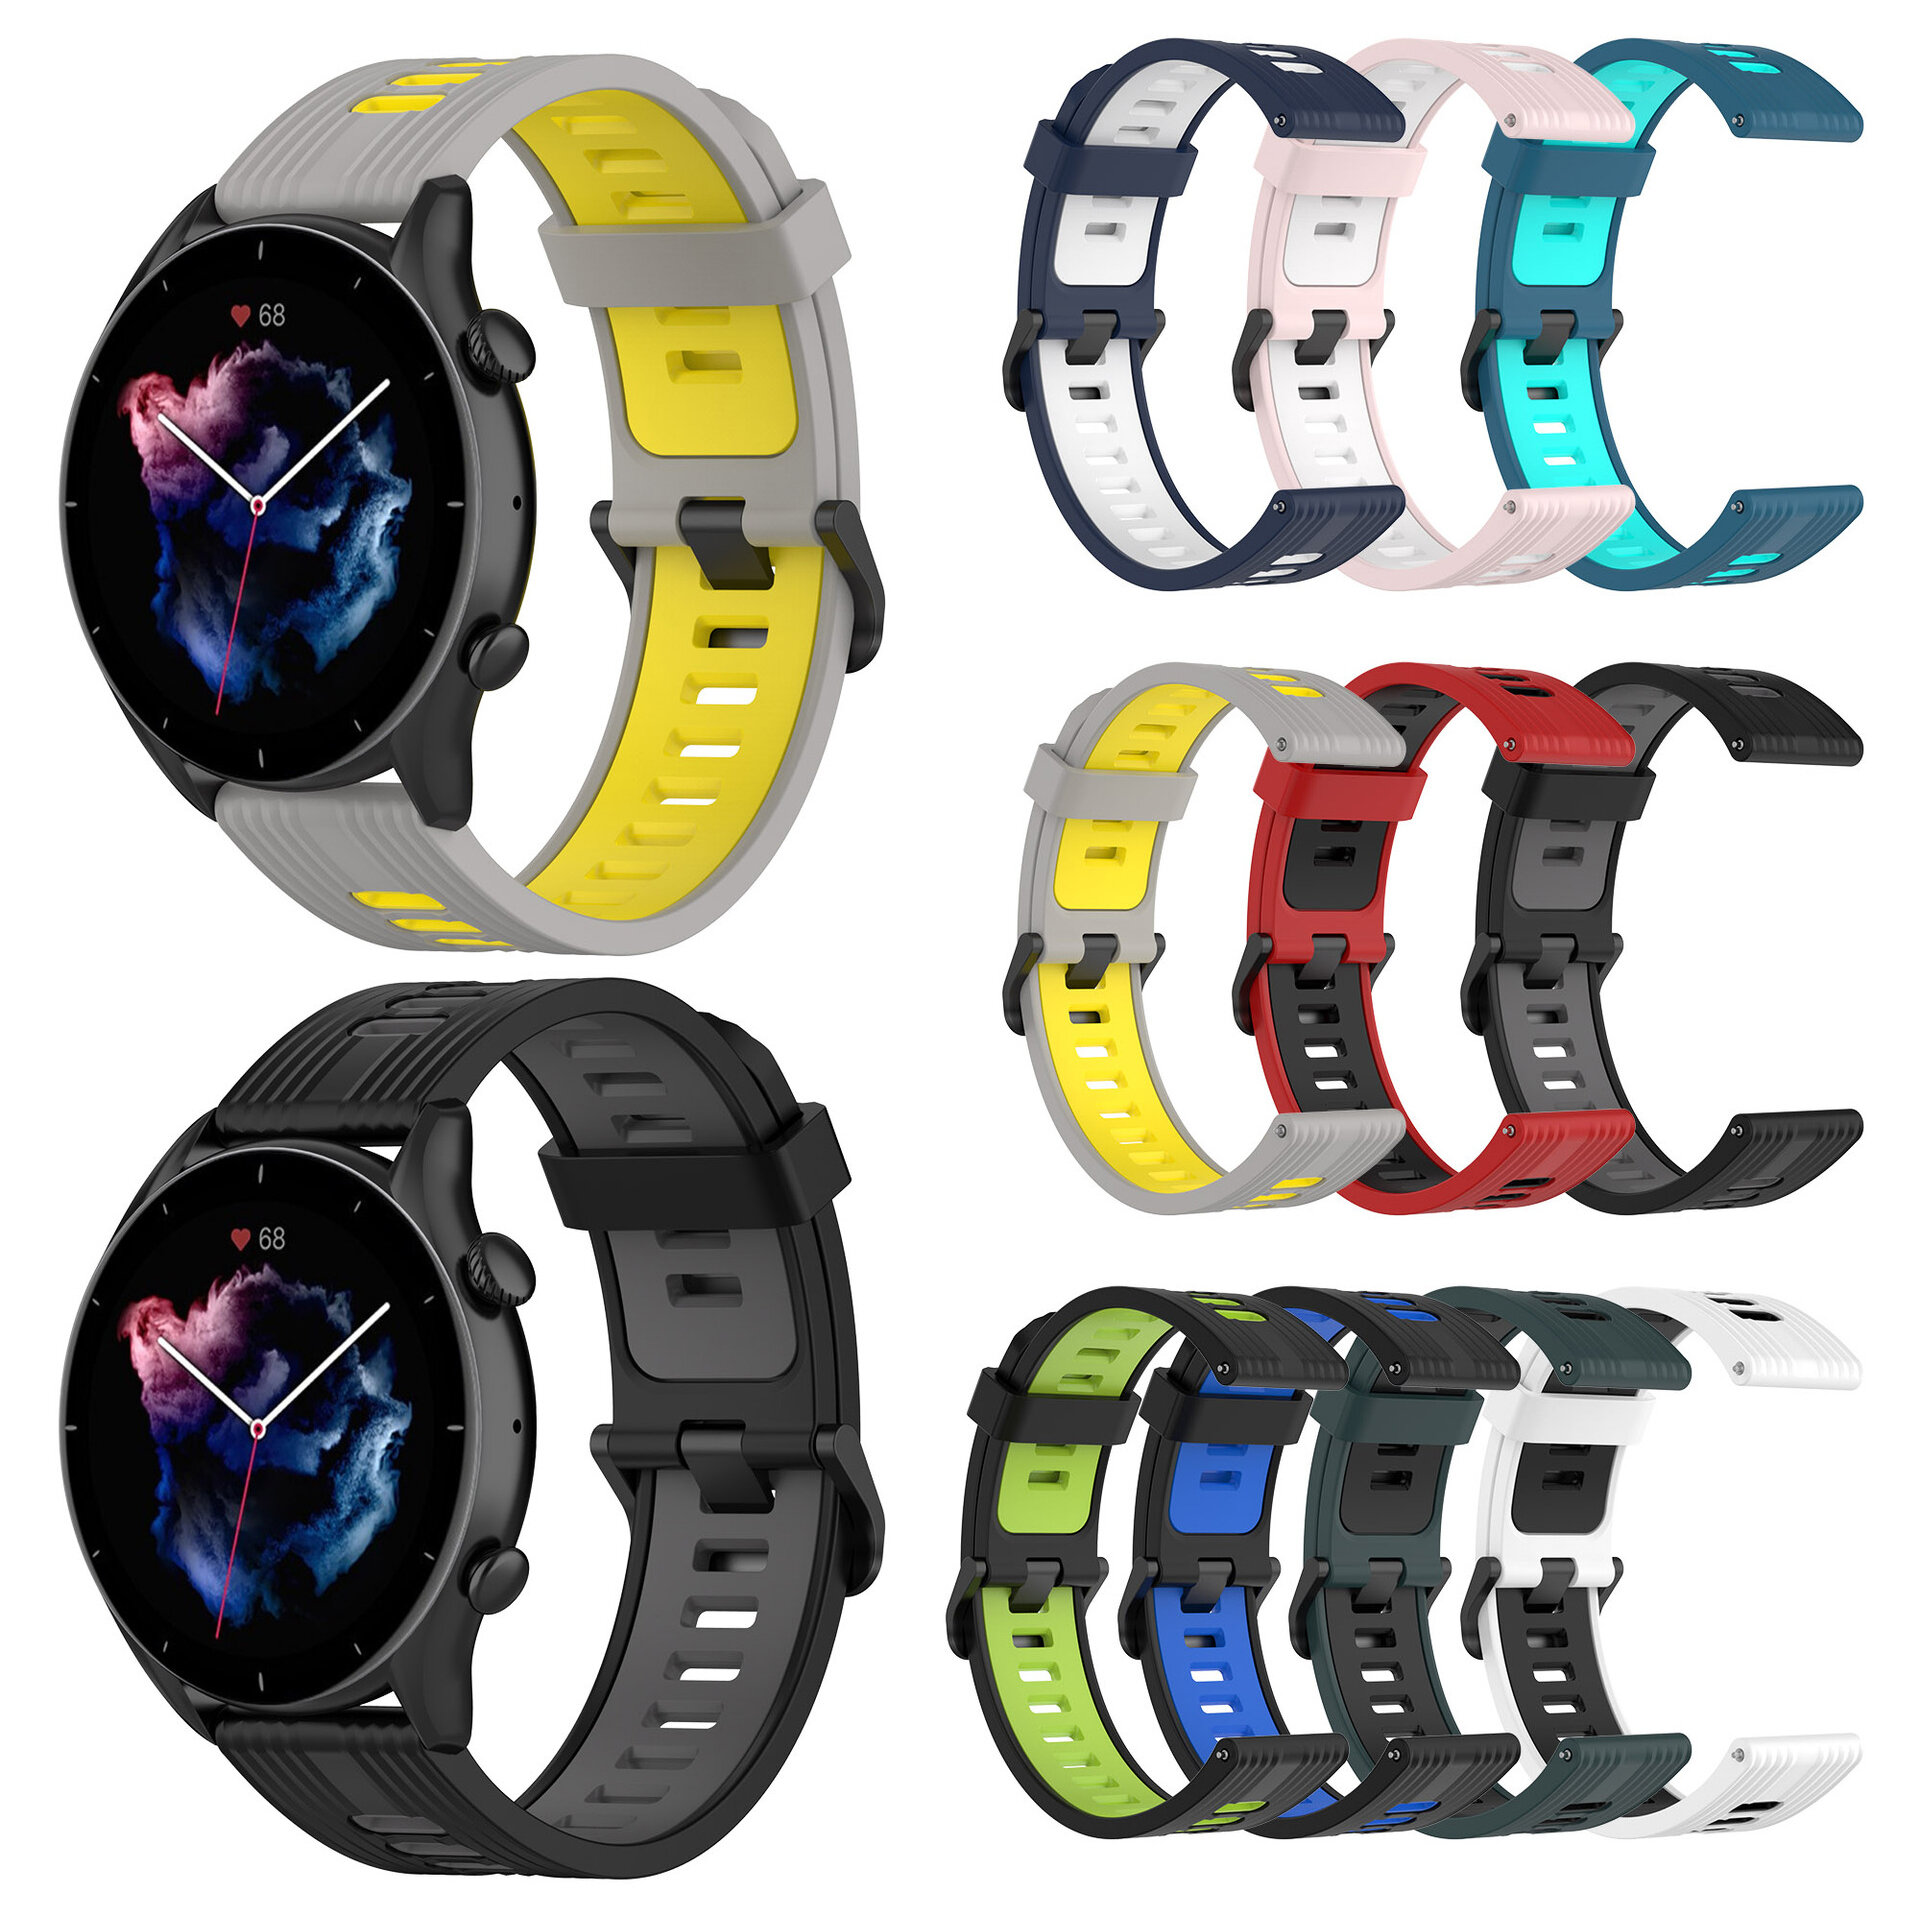 Bakeey 20/22mm Width Comfortable Breathable Sweatproof Soft Silicone Watch Band Strap Replacement for Huami Amazfit GTS3